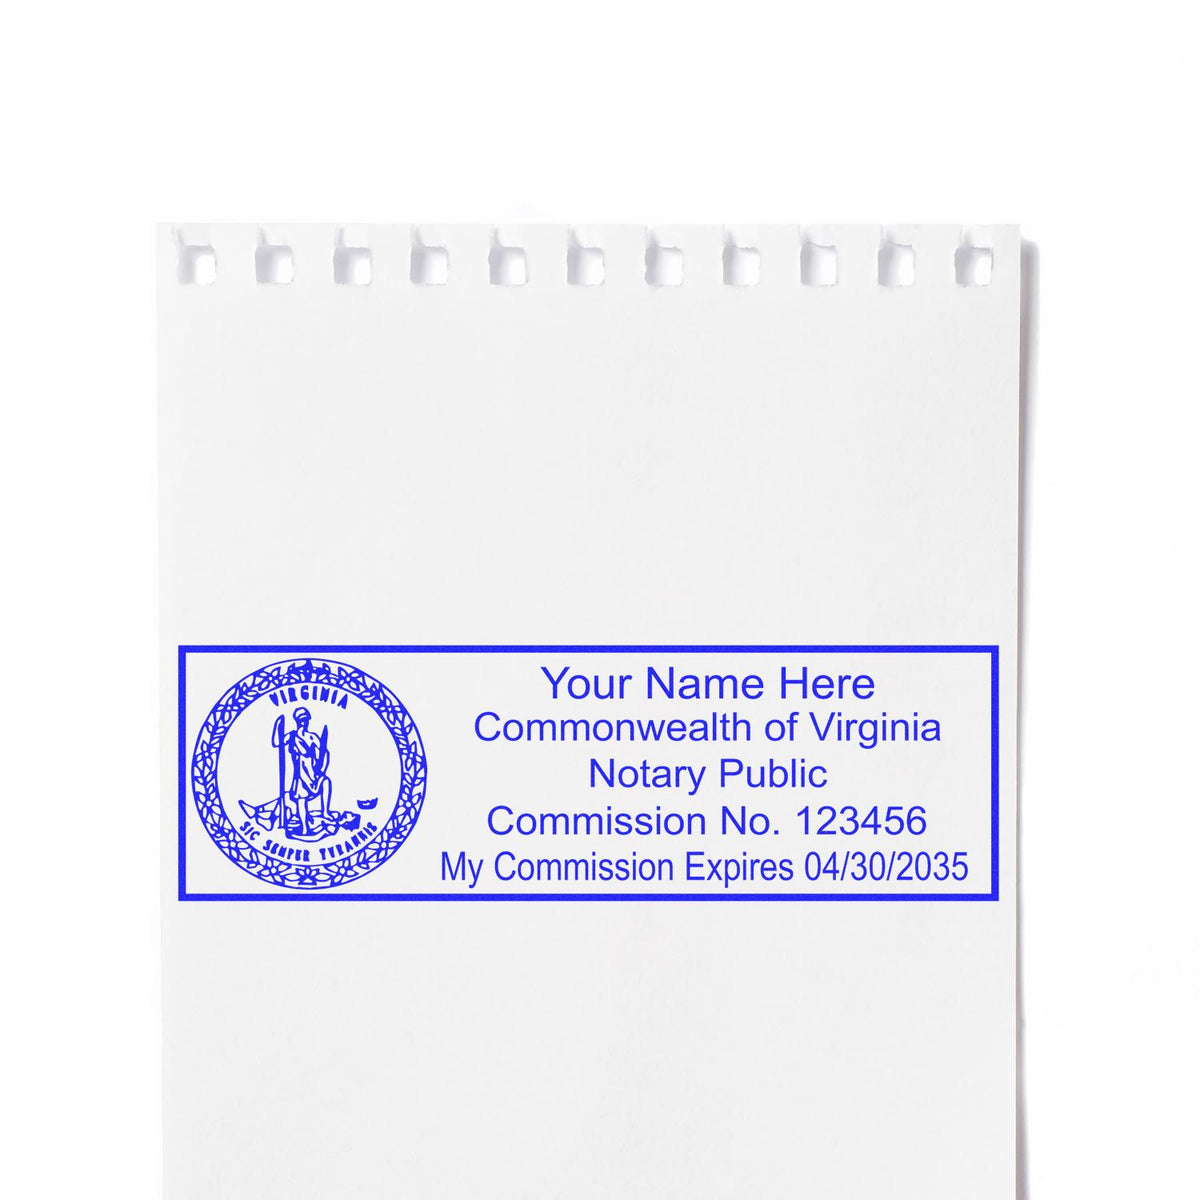 An alternative view of the Heavy-Duty Virginia Rectangular Notary Stamp stamped on a sheet of paper showing the image in use